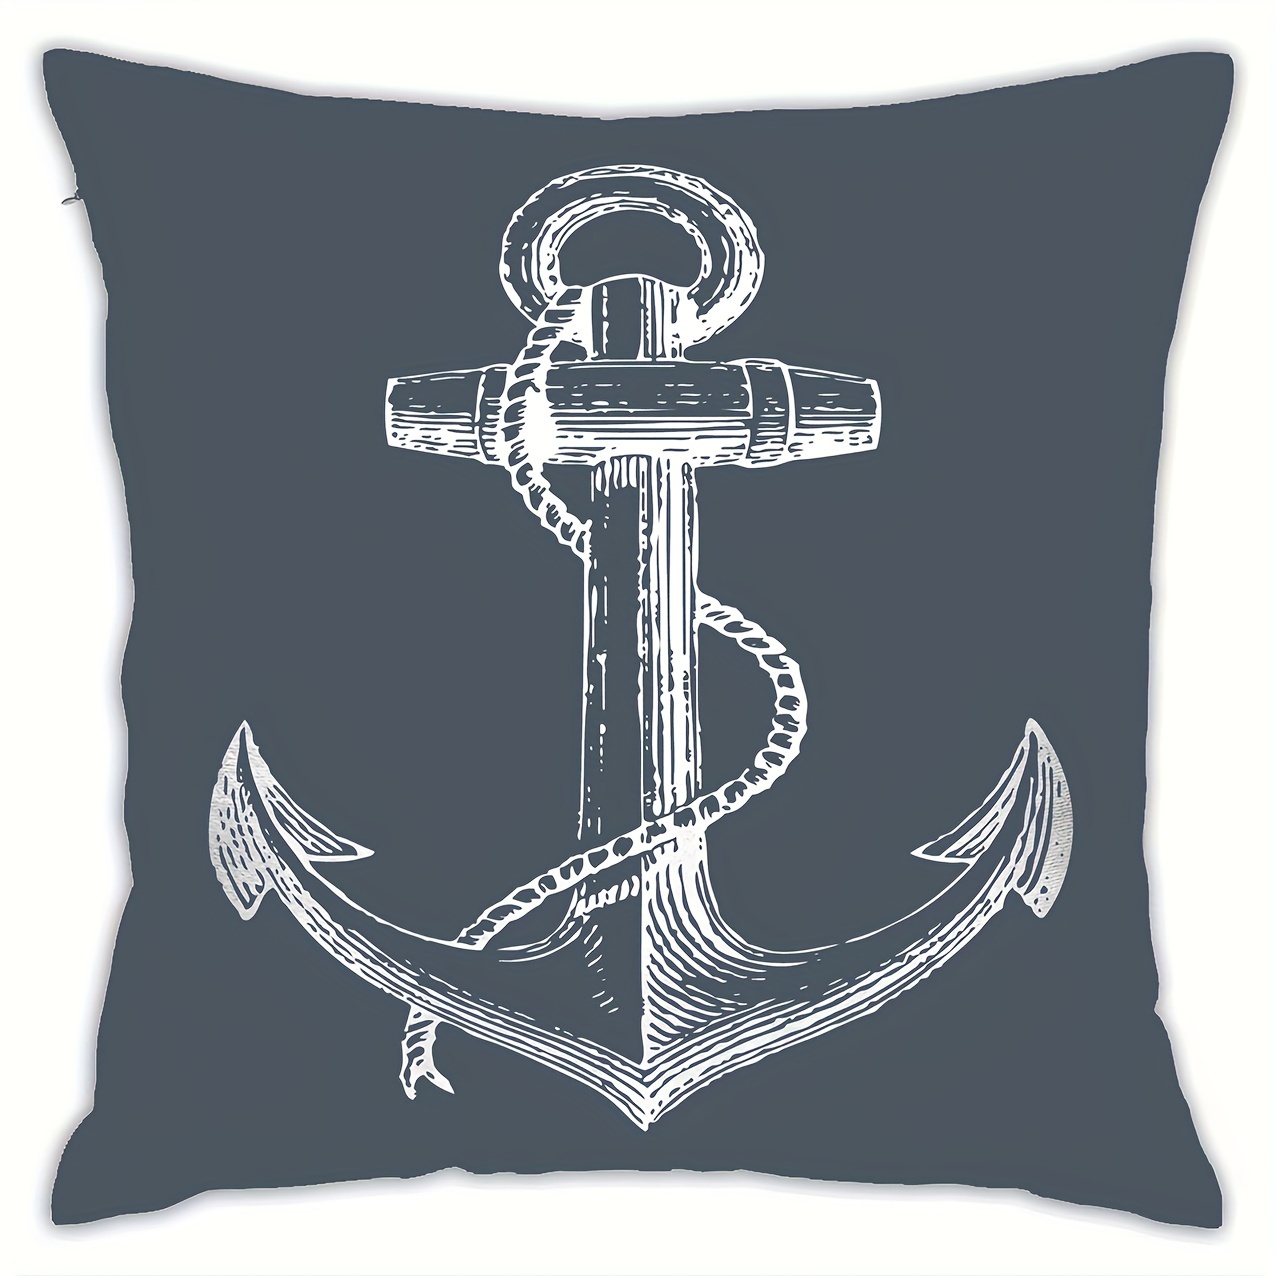 

1pc, Super Soft Short Plush Throw Pillow (18''x18''), White Nautical Anchor Navy Blue, Pillow Cover, Home Decor, Home Decor, Room Decor, Bedroom Decor, Collectible Decoration (cushion Is Not Included)